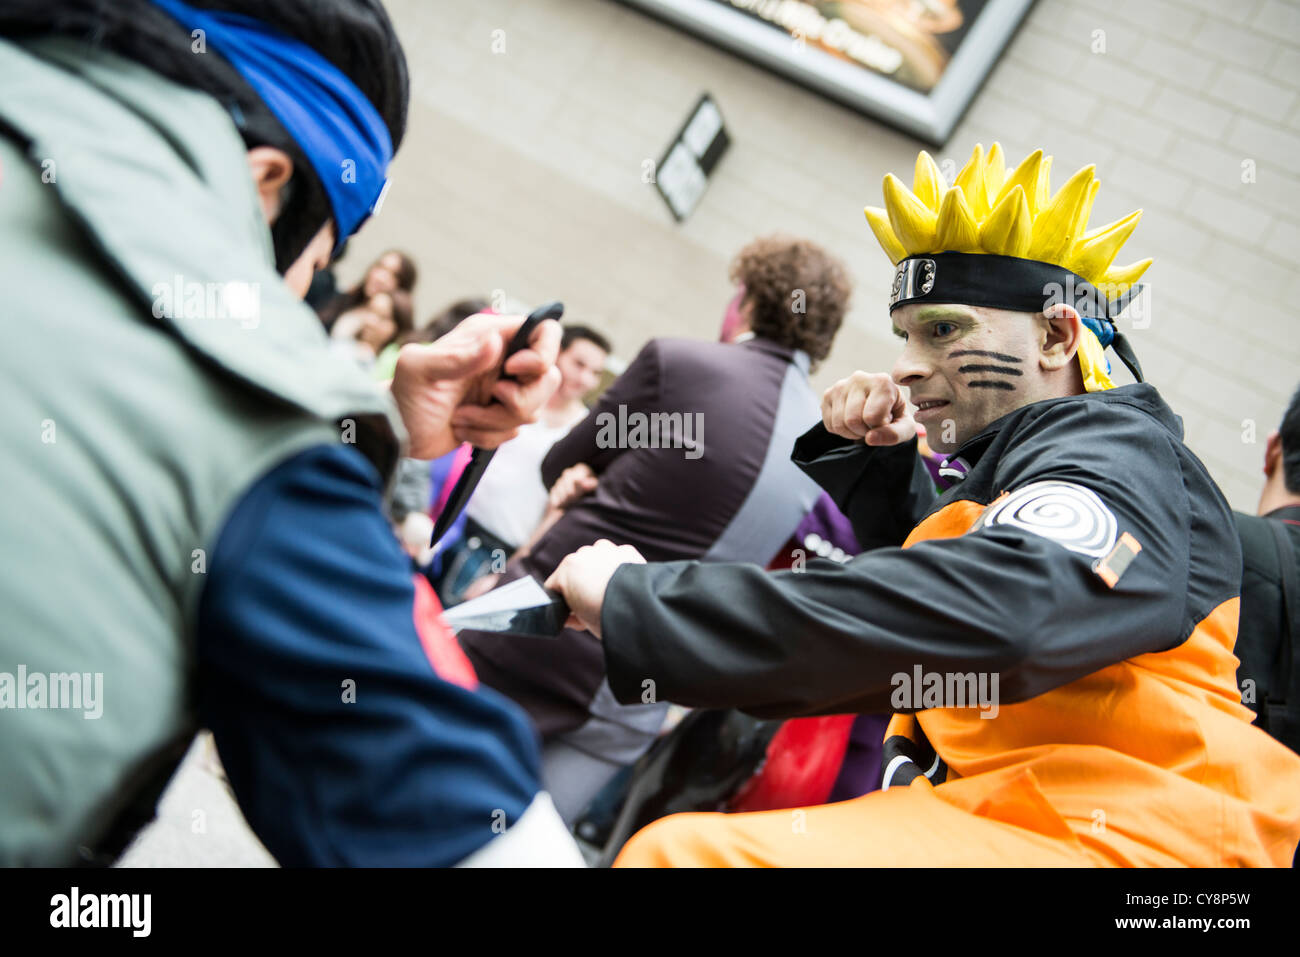 LONDON, UK - OCTOBER 28: Cosplayers impersonating character Naruto pose for photographers at the London Comicon MCM Expo Stock Photo